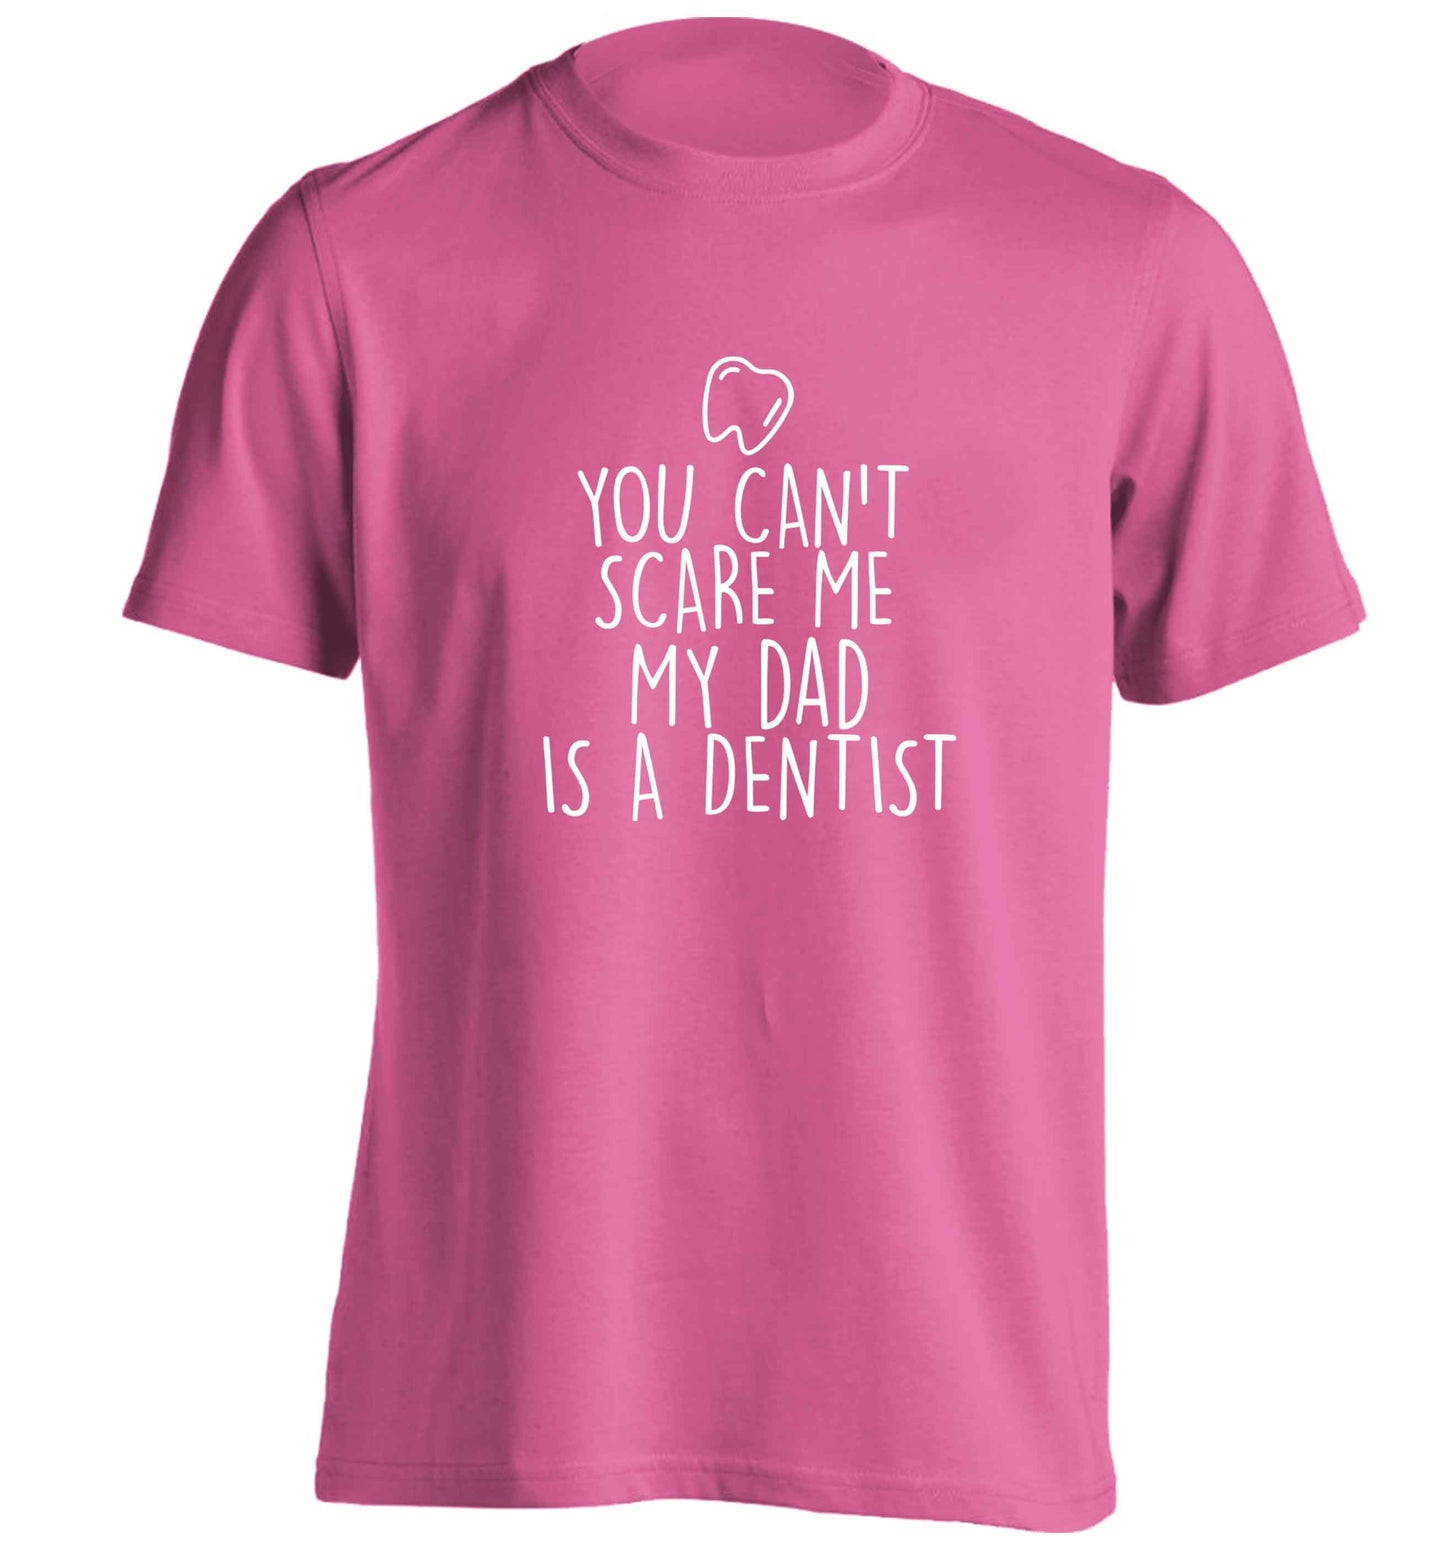 You can't scare me my dad is a dentist adults unisex pink Tshirt 2XL